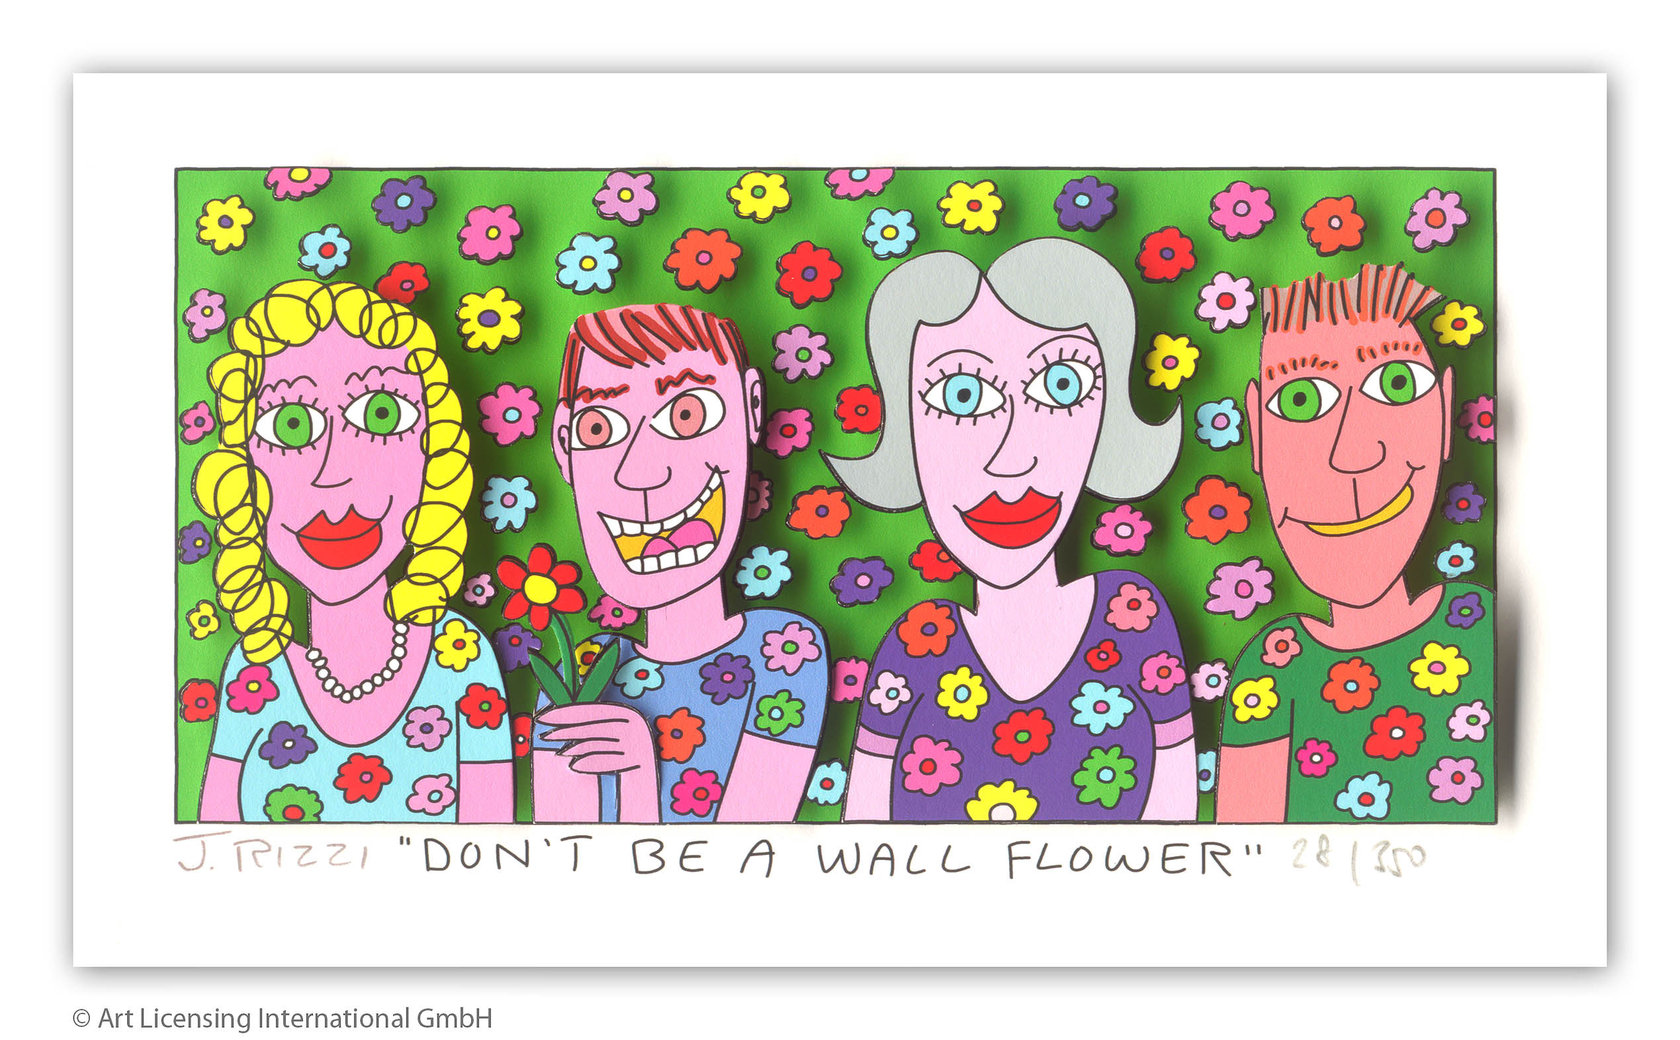 James Rizzi - DON'T BE A WALL FLOWER